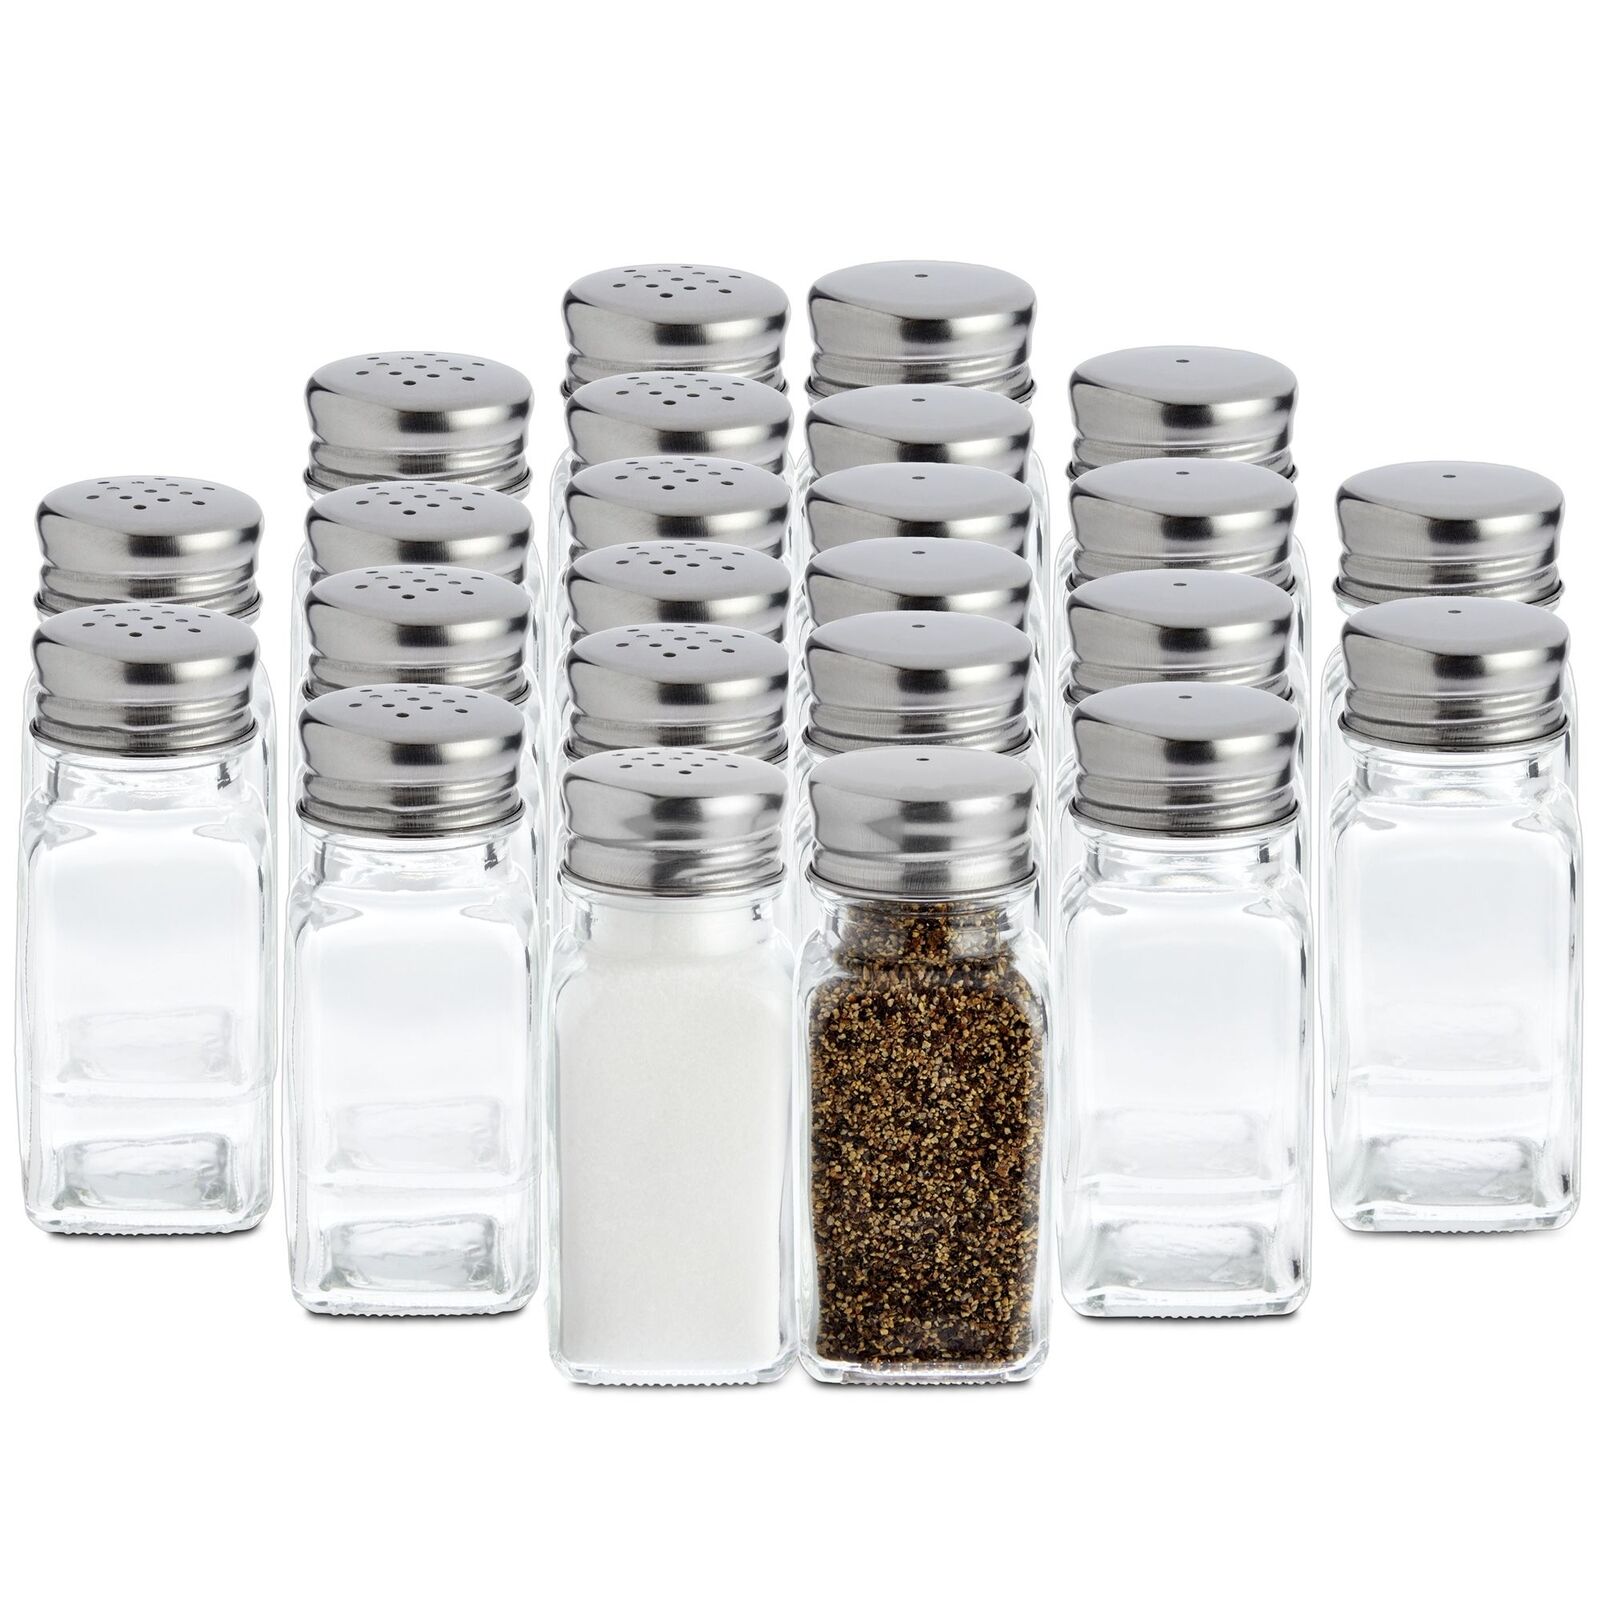 24x Glass Salt and Pepper Shakers Set Dispenser with Stainless Steel Top Clear